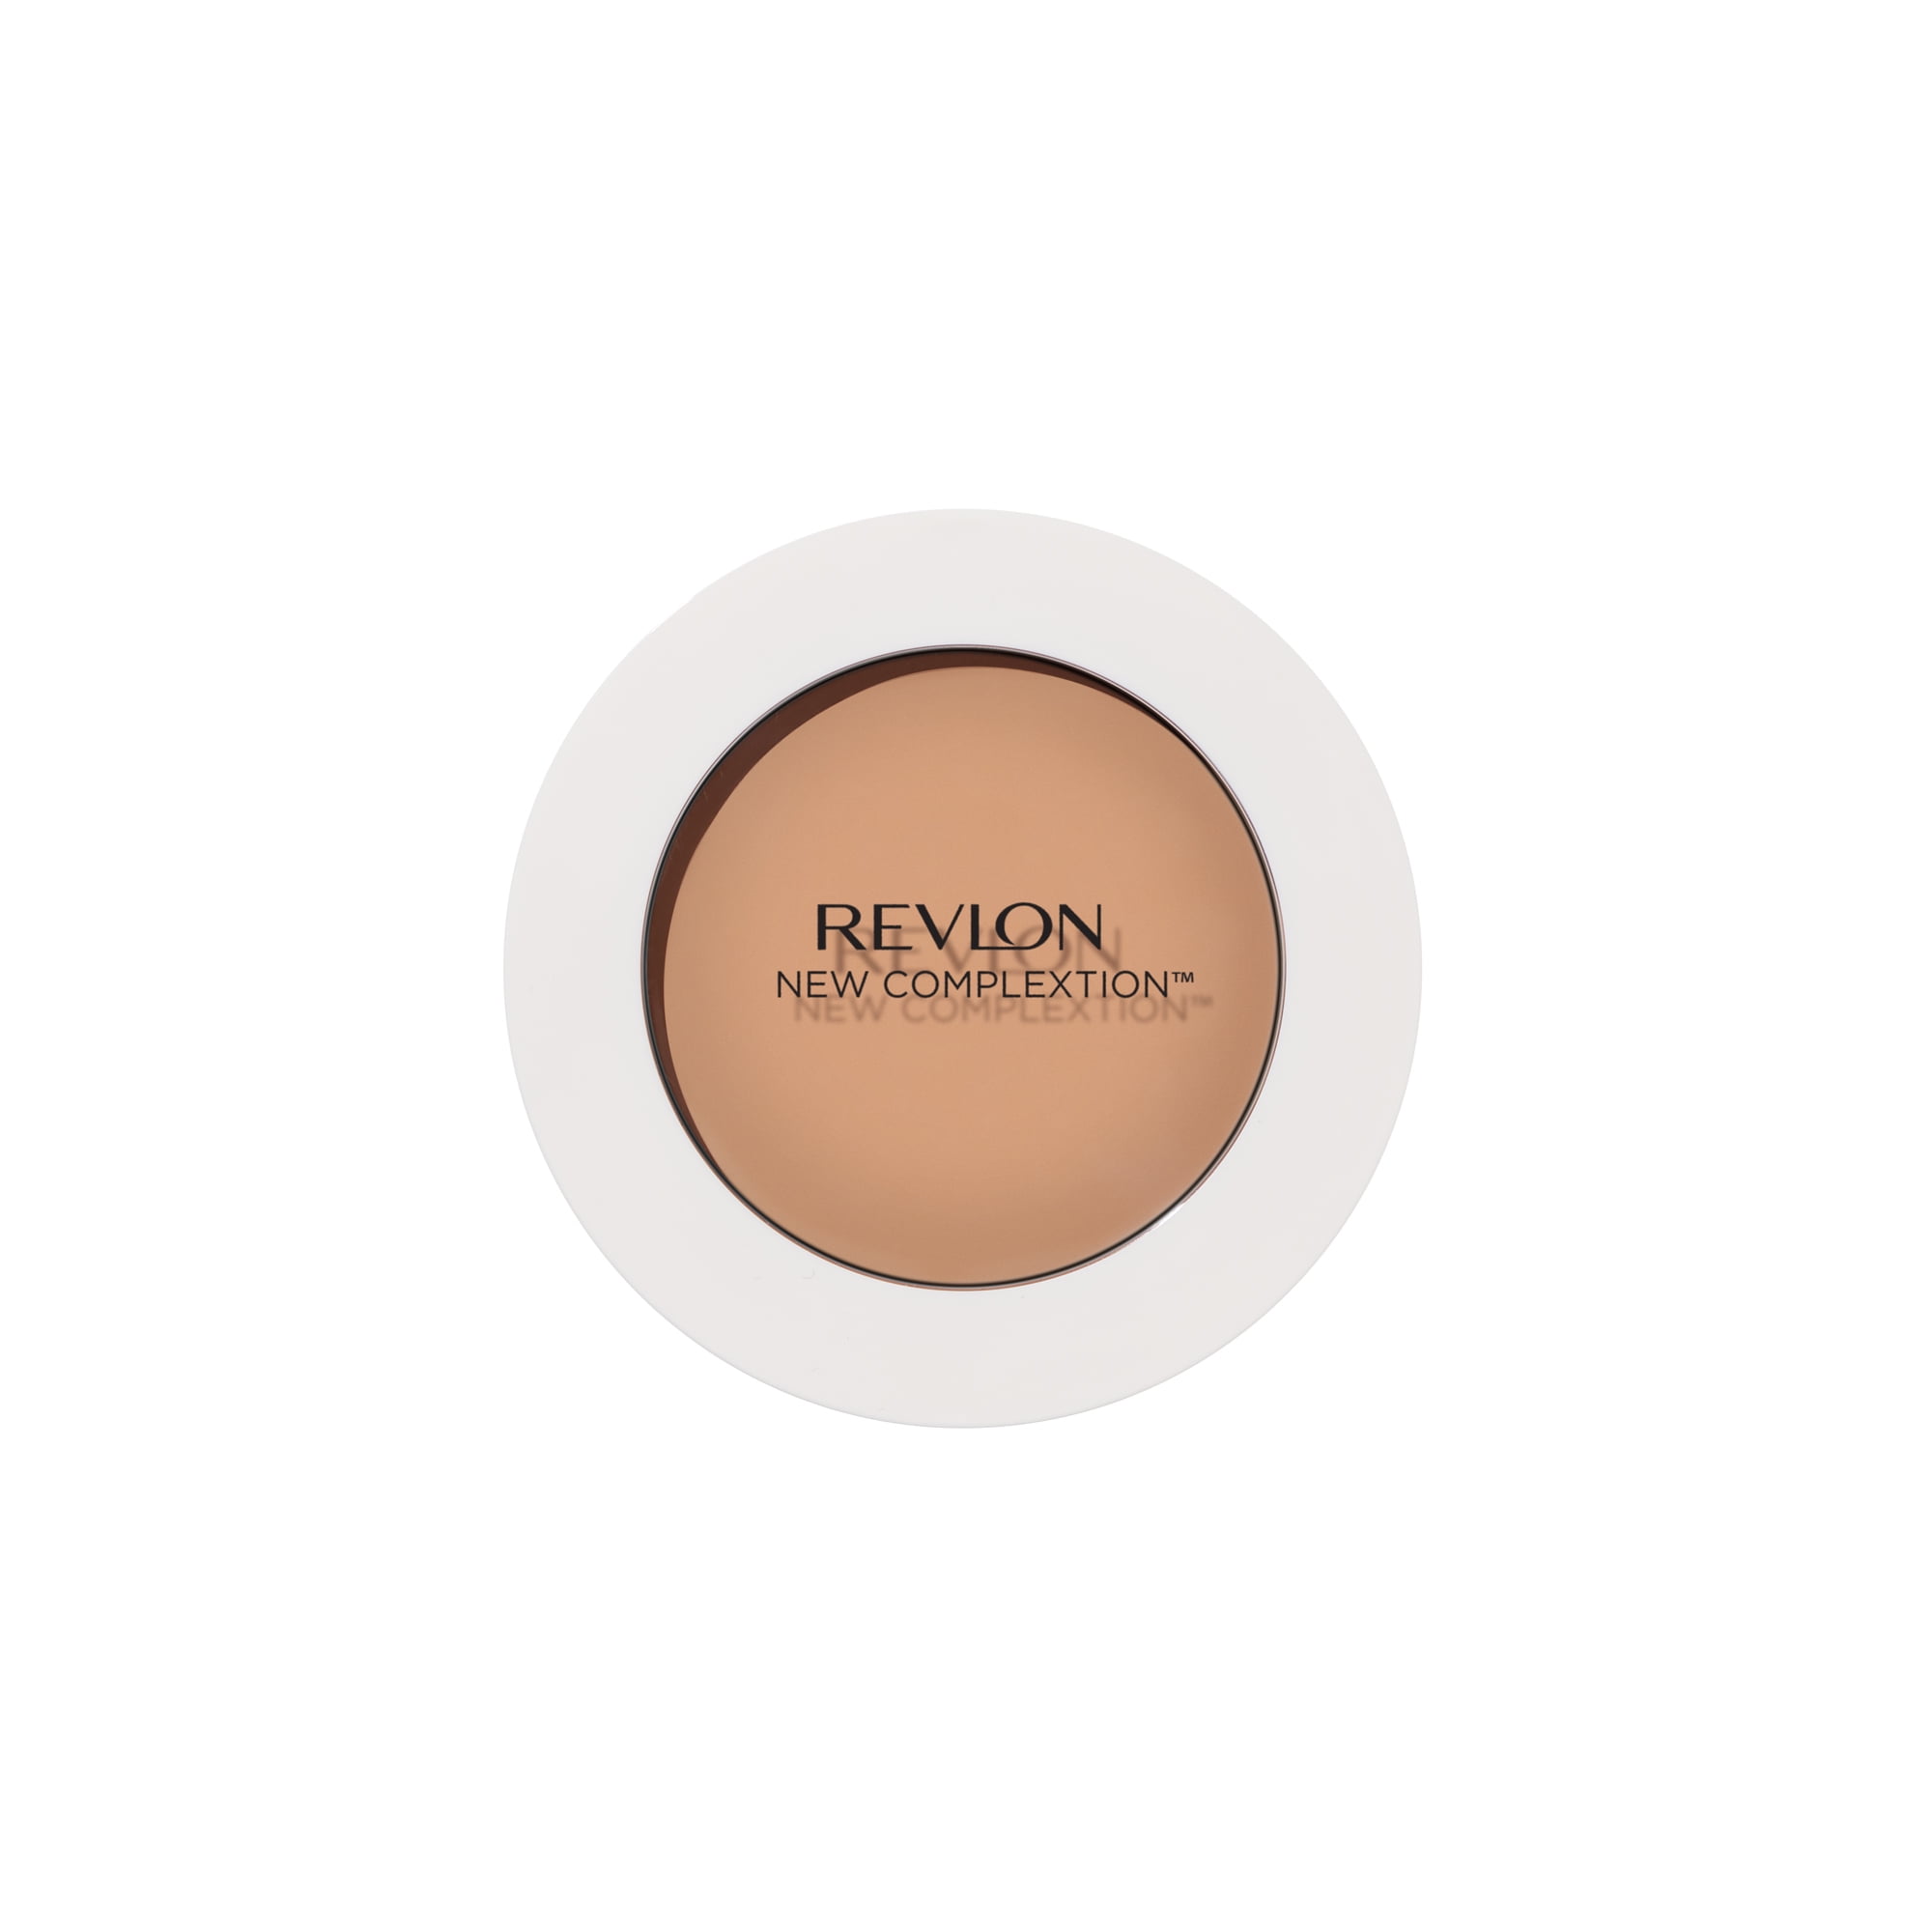 Revlon New Complexion One-Step Compact Makeup, 004 Natural Beige, 0.35 ...